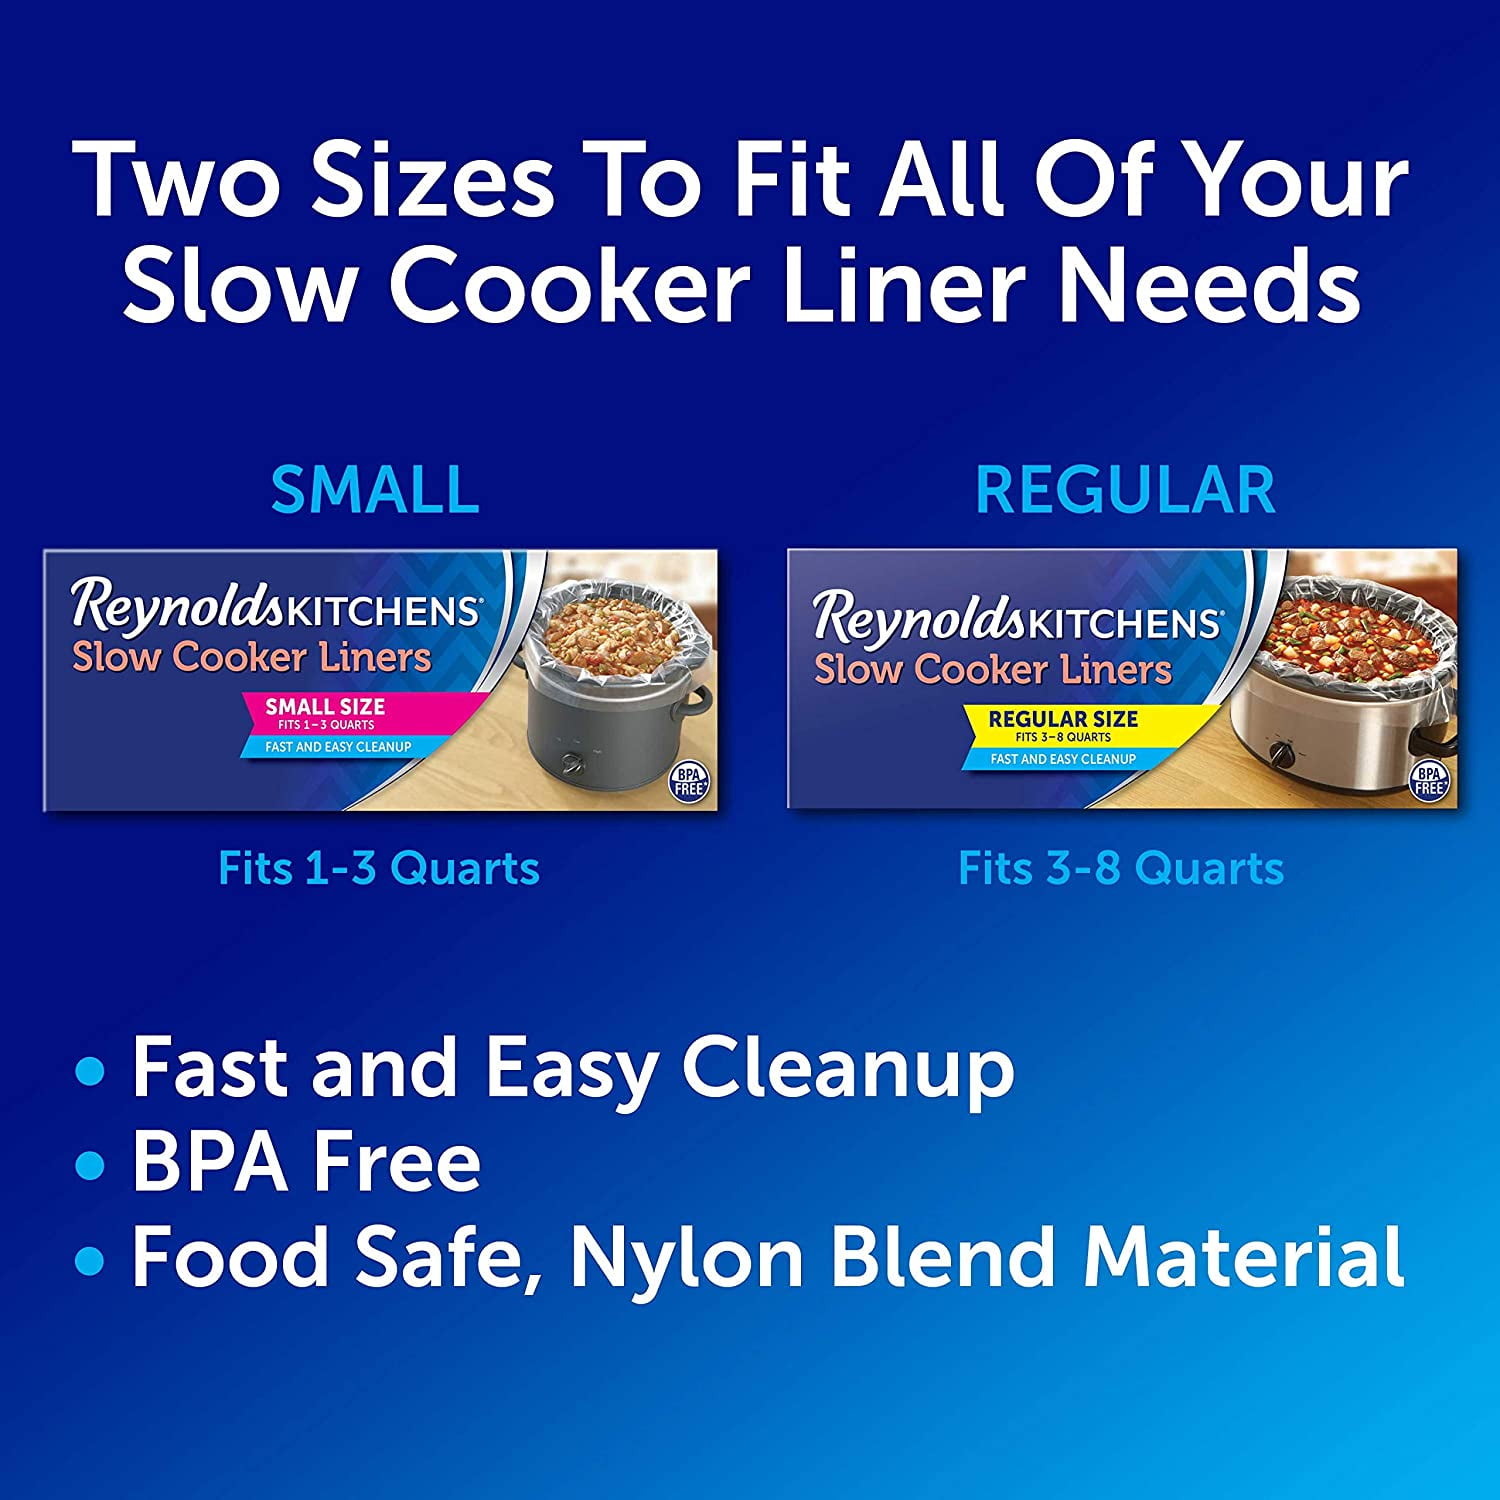 16 Counts Slow Cooker Liners Small Size 11X16 Inch - Fits 1 to 3